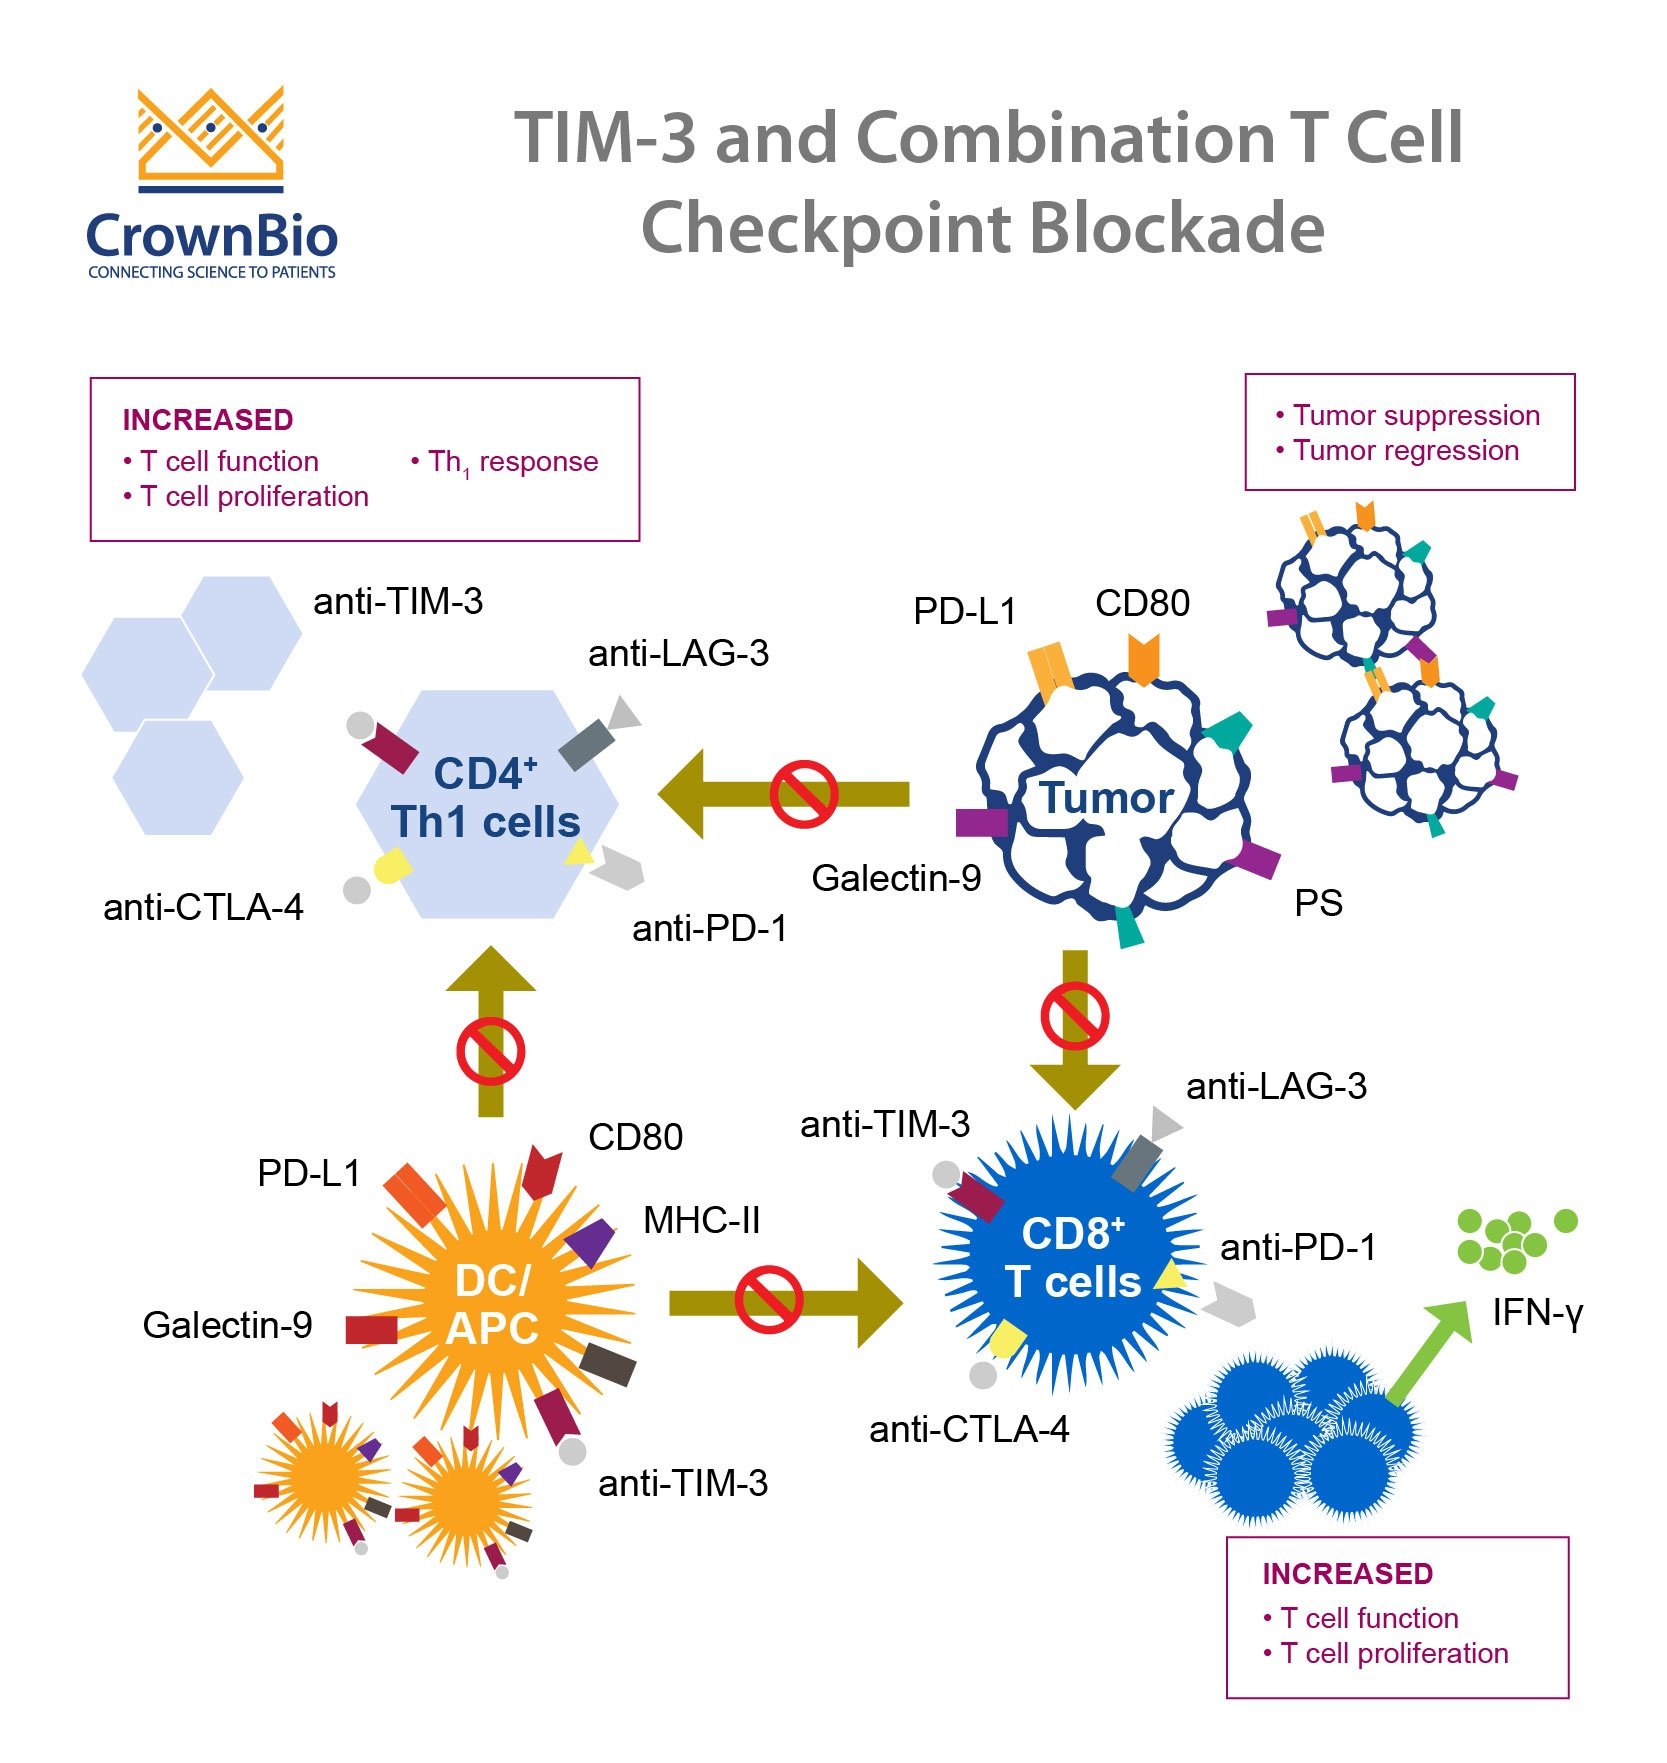 What's Next for Immune Checkpoint Inhibitors: TIM-3?